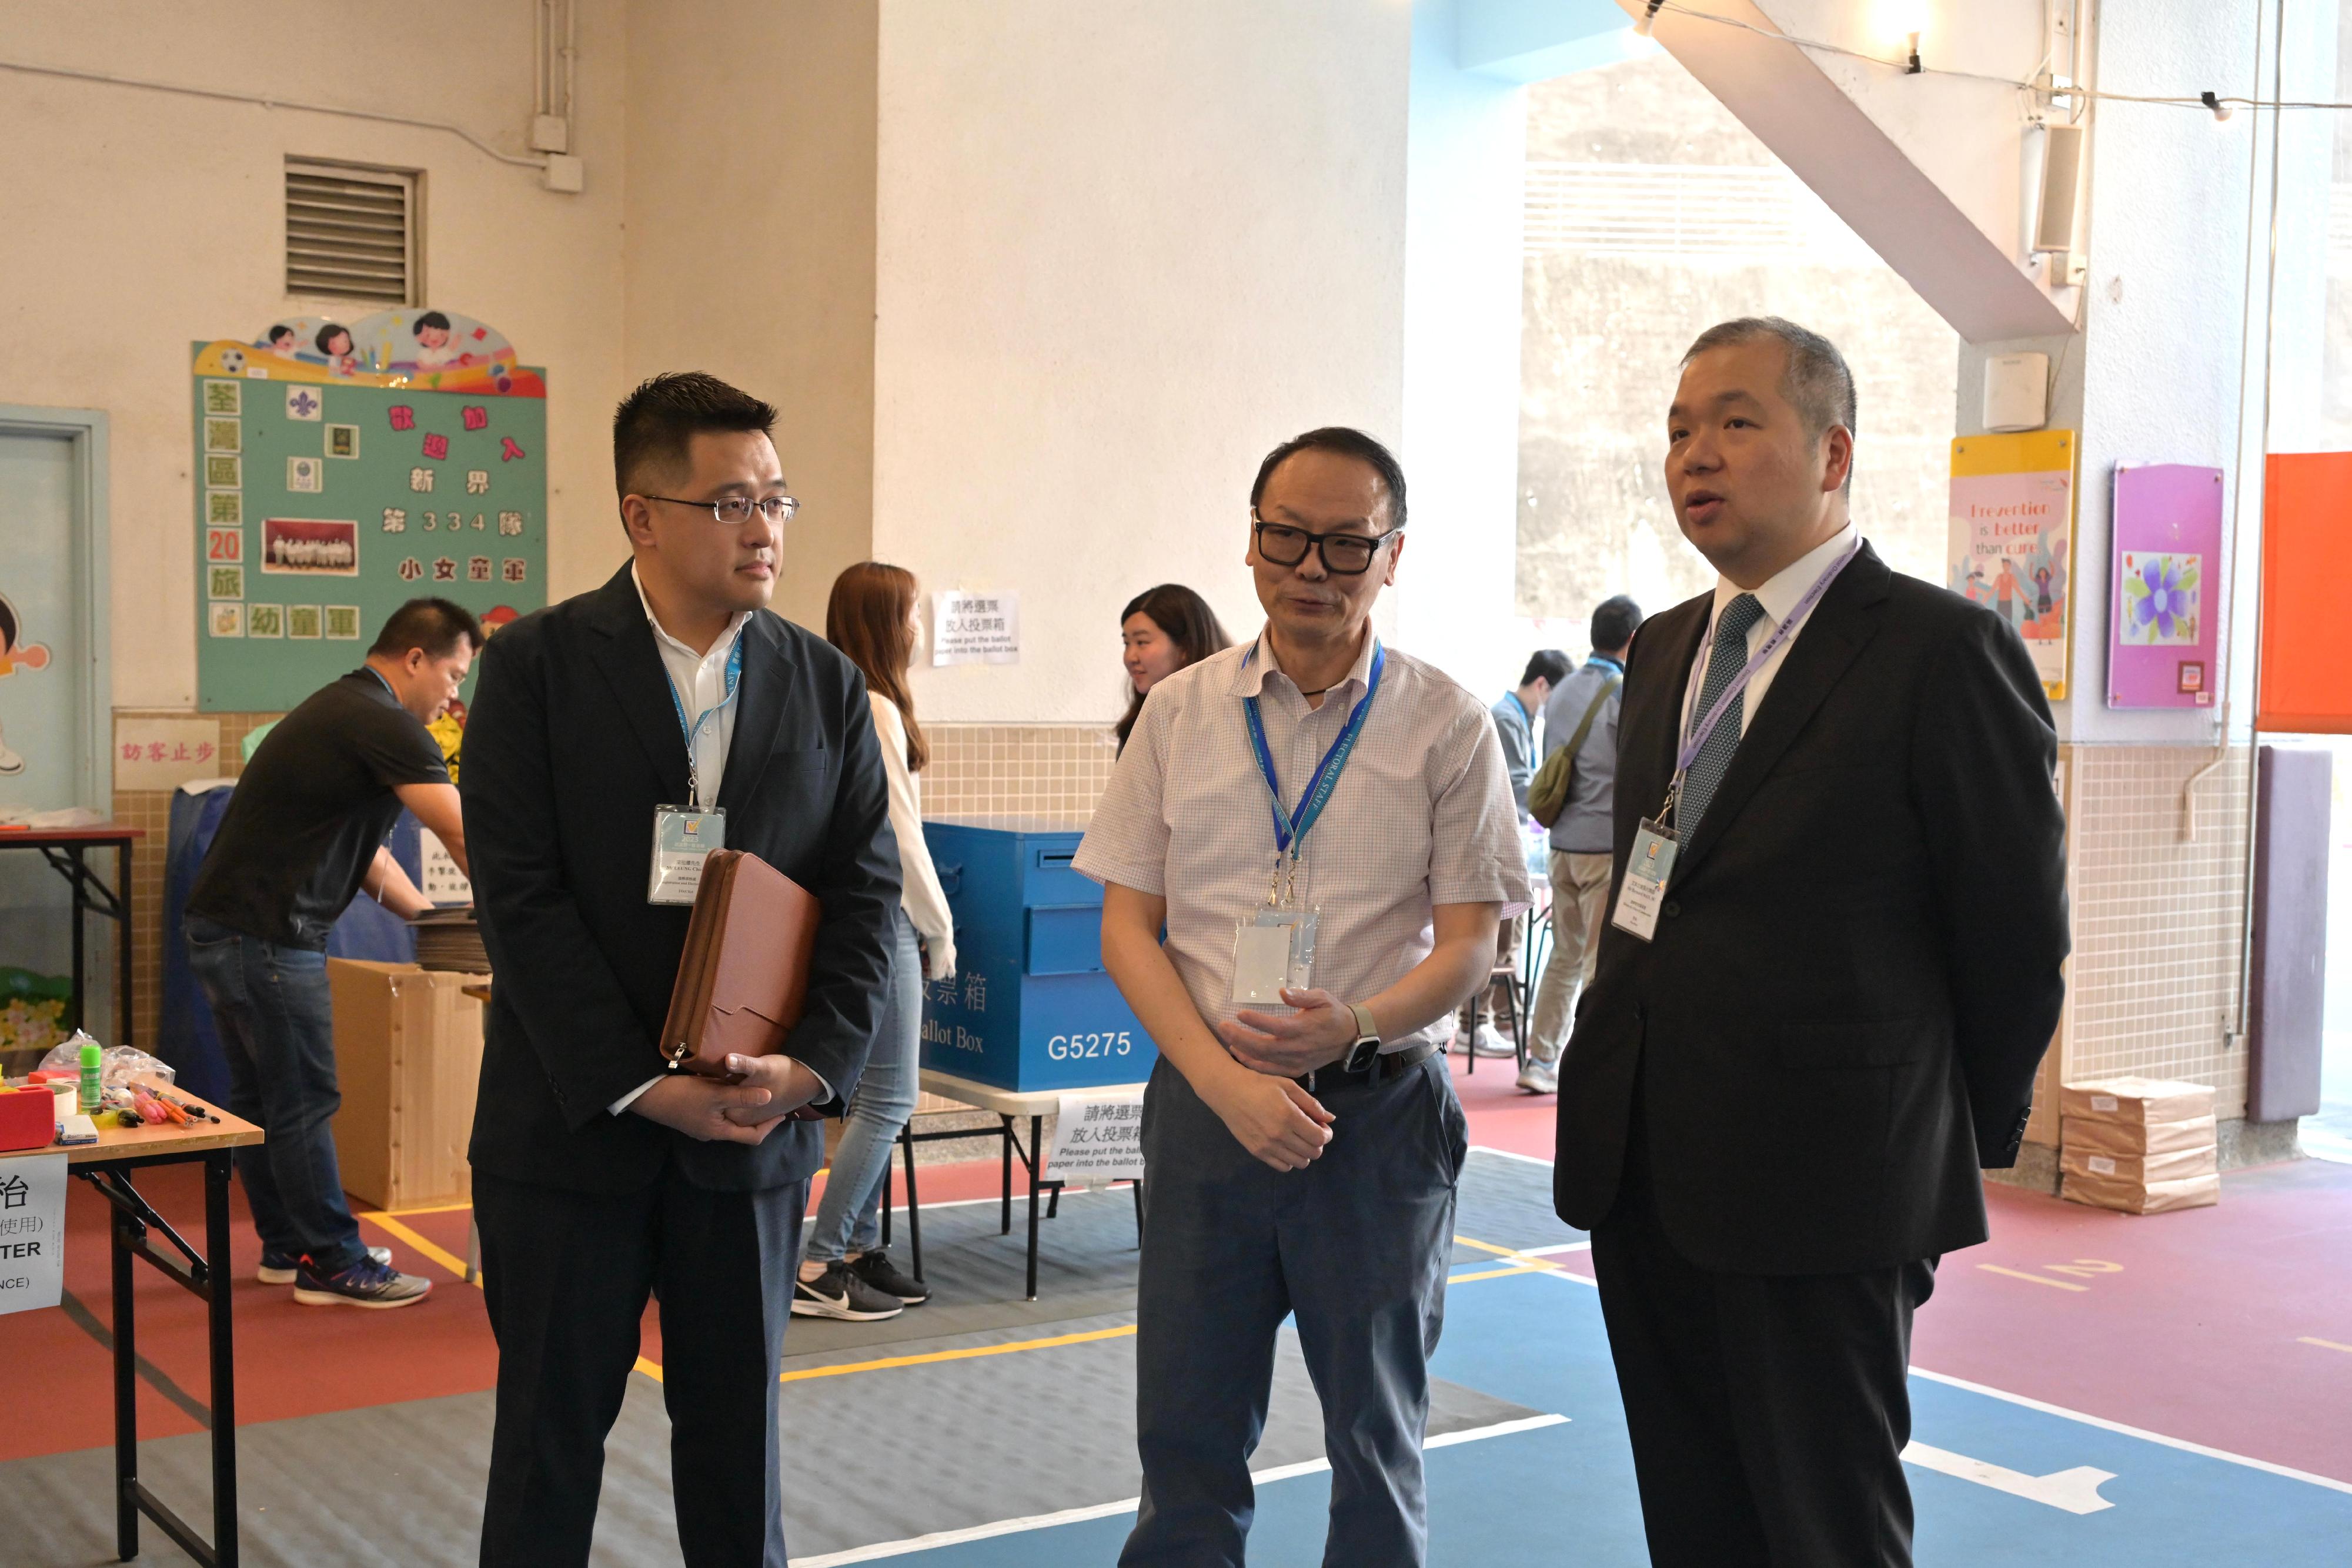 The Electoral Affairs Commission member Mr Bernard Man, SC (first right) visits the District Council geographical constituency polling station of the 2023 District Council Ordinary Election at the Tsuen Wan Government Primary School this afternoon (December 10) to inspect the operation of the polling station. He is being briefed by the Presiding Officer.